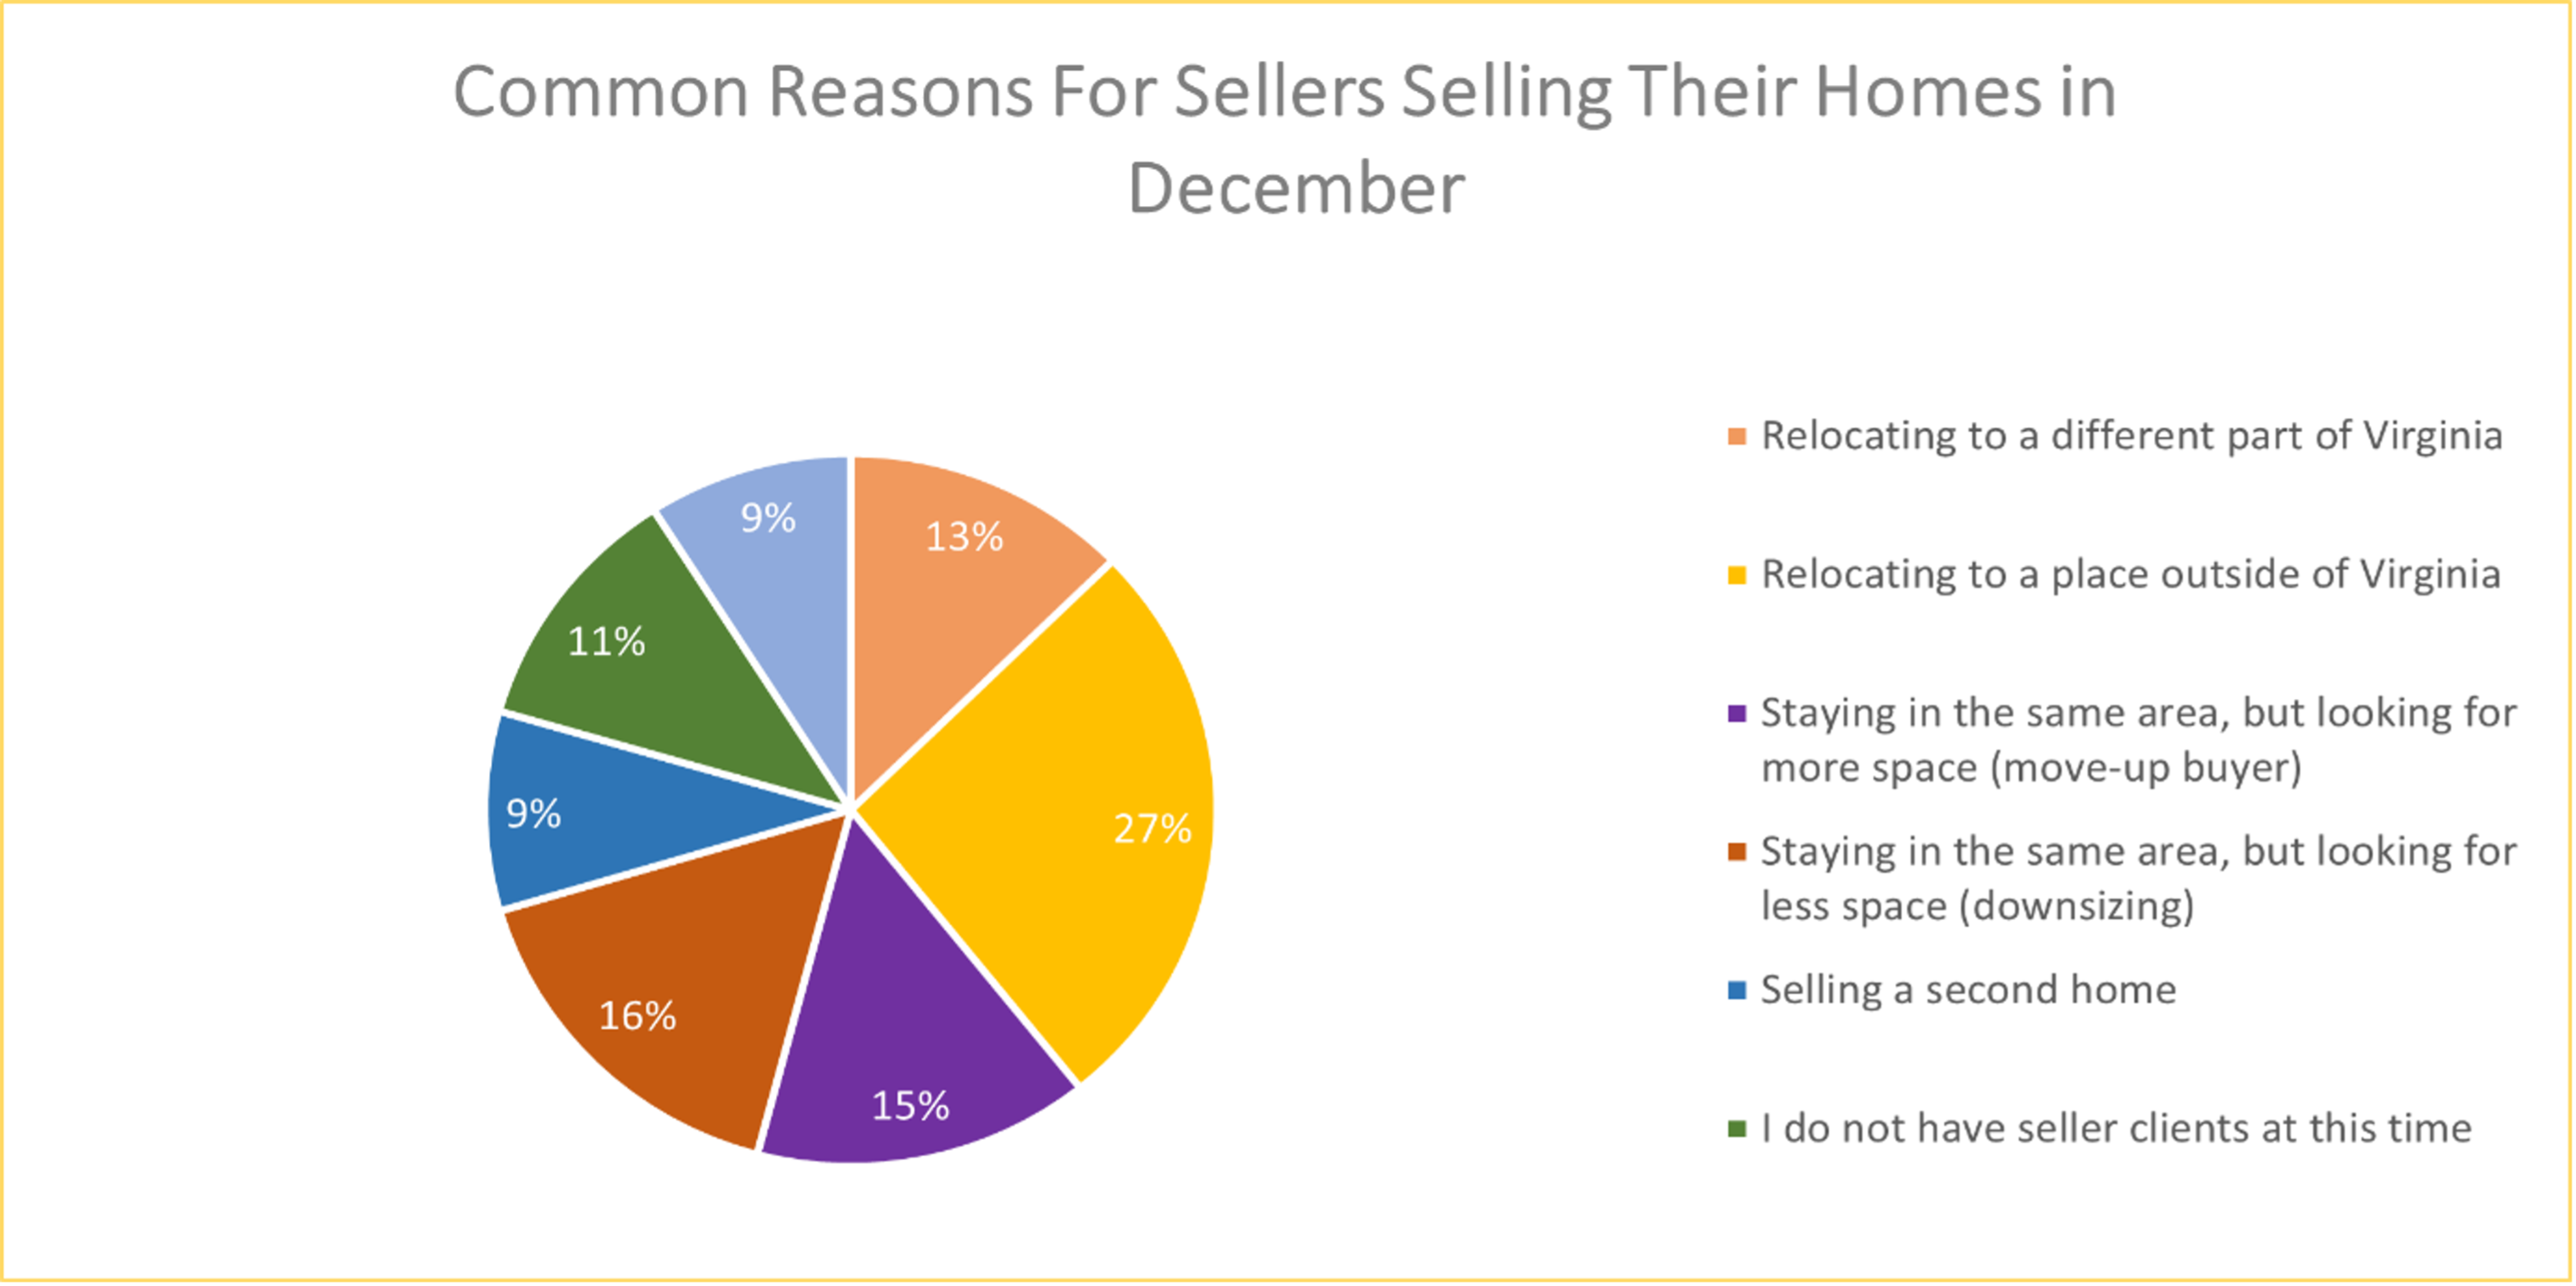 Chart: Reasons for Selling